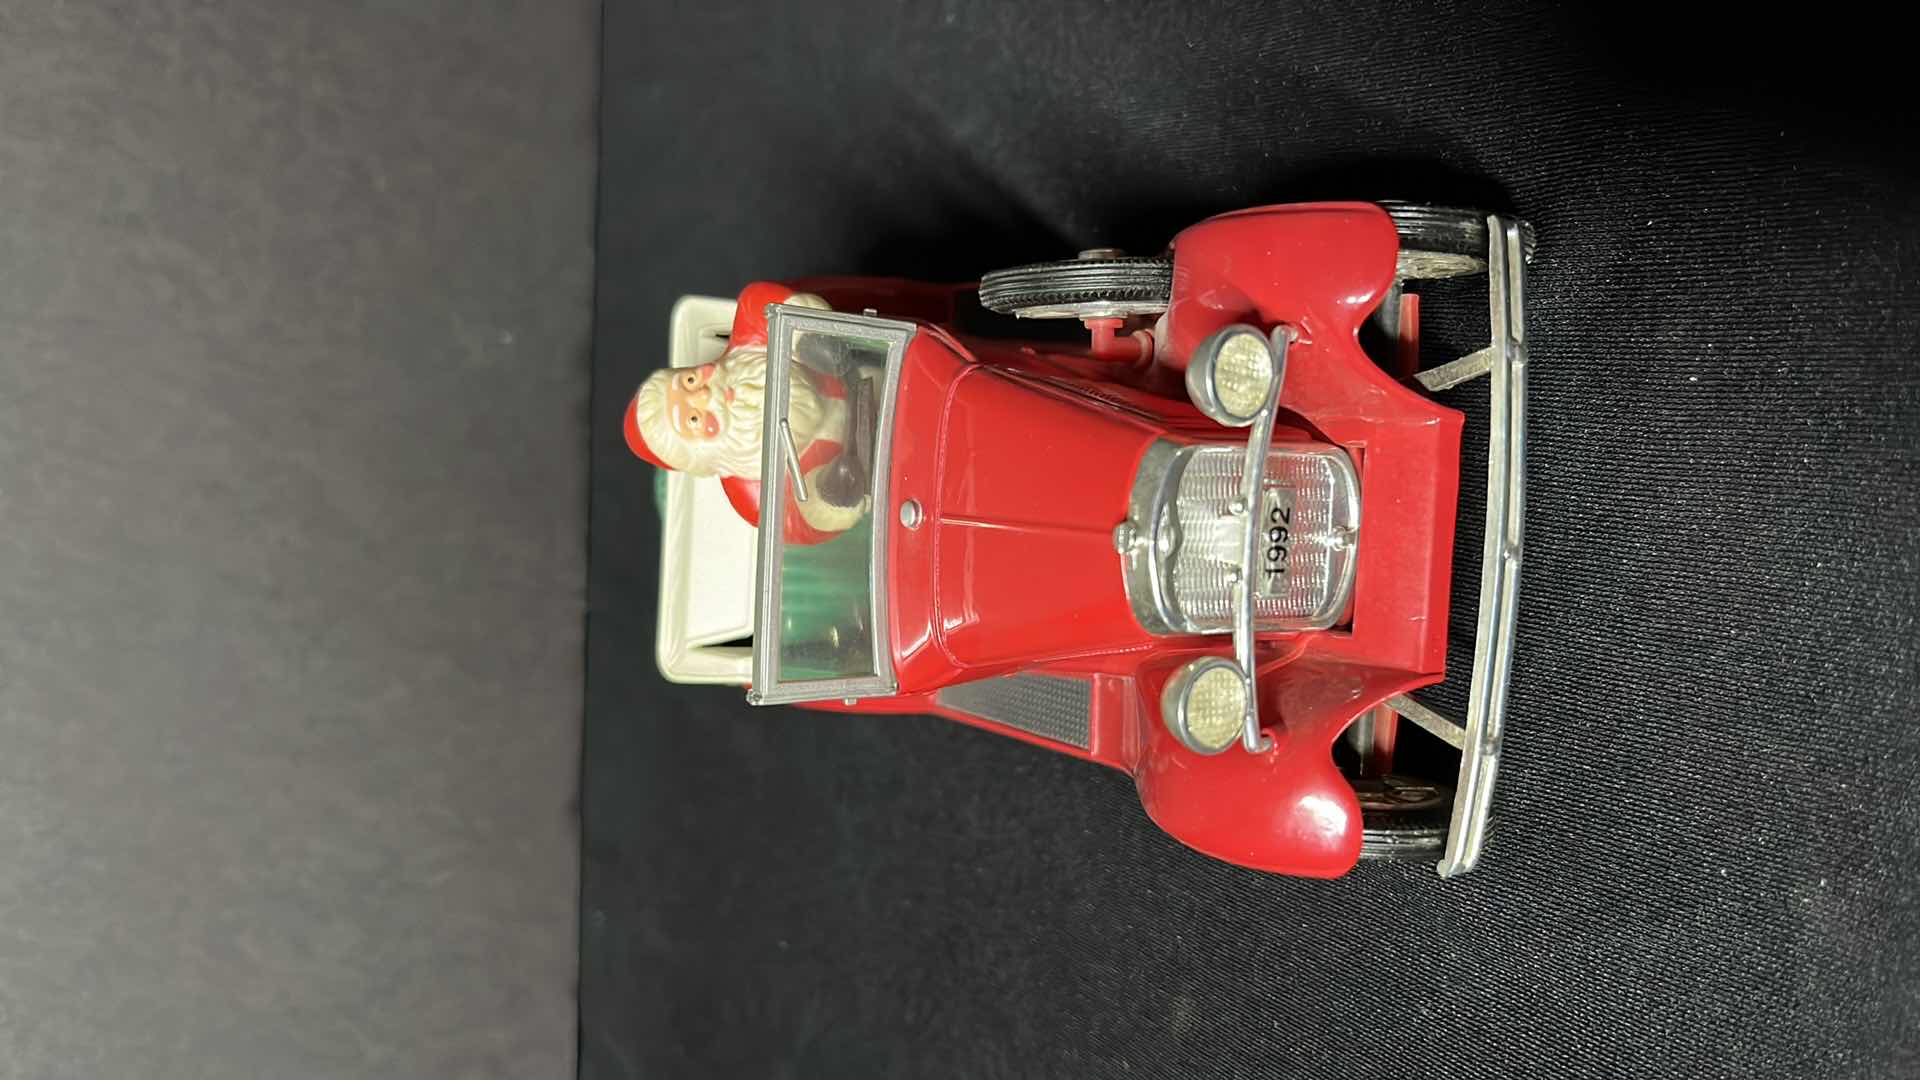 Photo 2 of THE EASTWOOD COMPANY DIE-CAST METAL GORD MODEL A 1992 SANTA’S ROADSTER LOCKING COIN BANK W KEY (STOCK #1928)